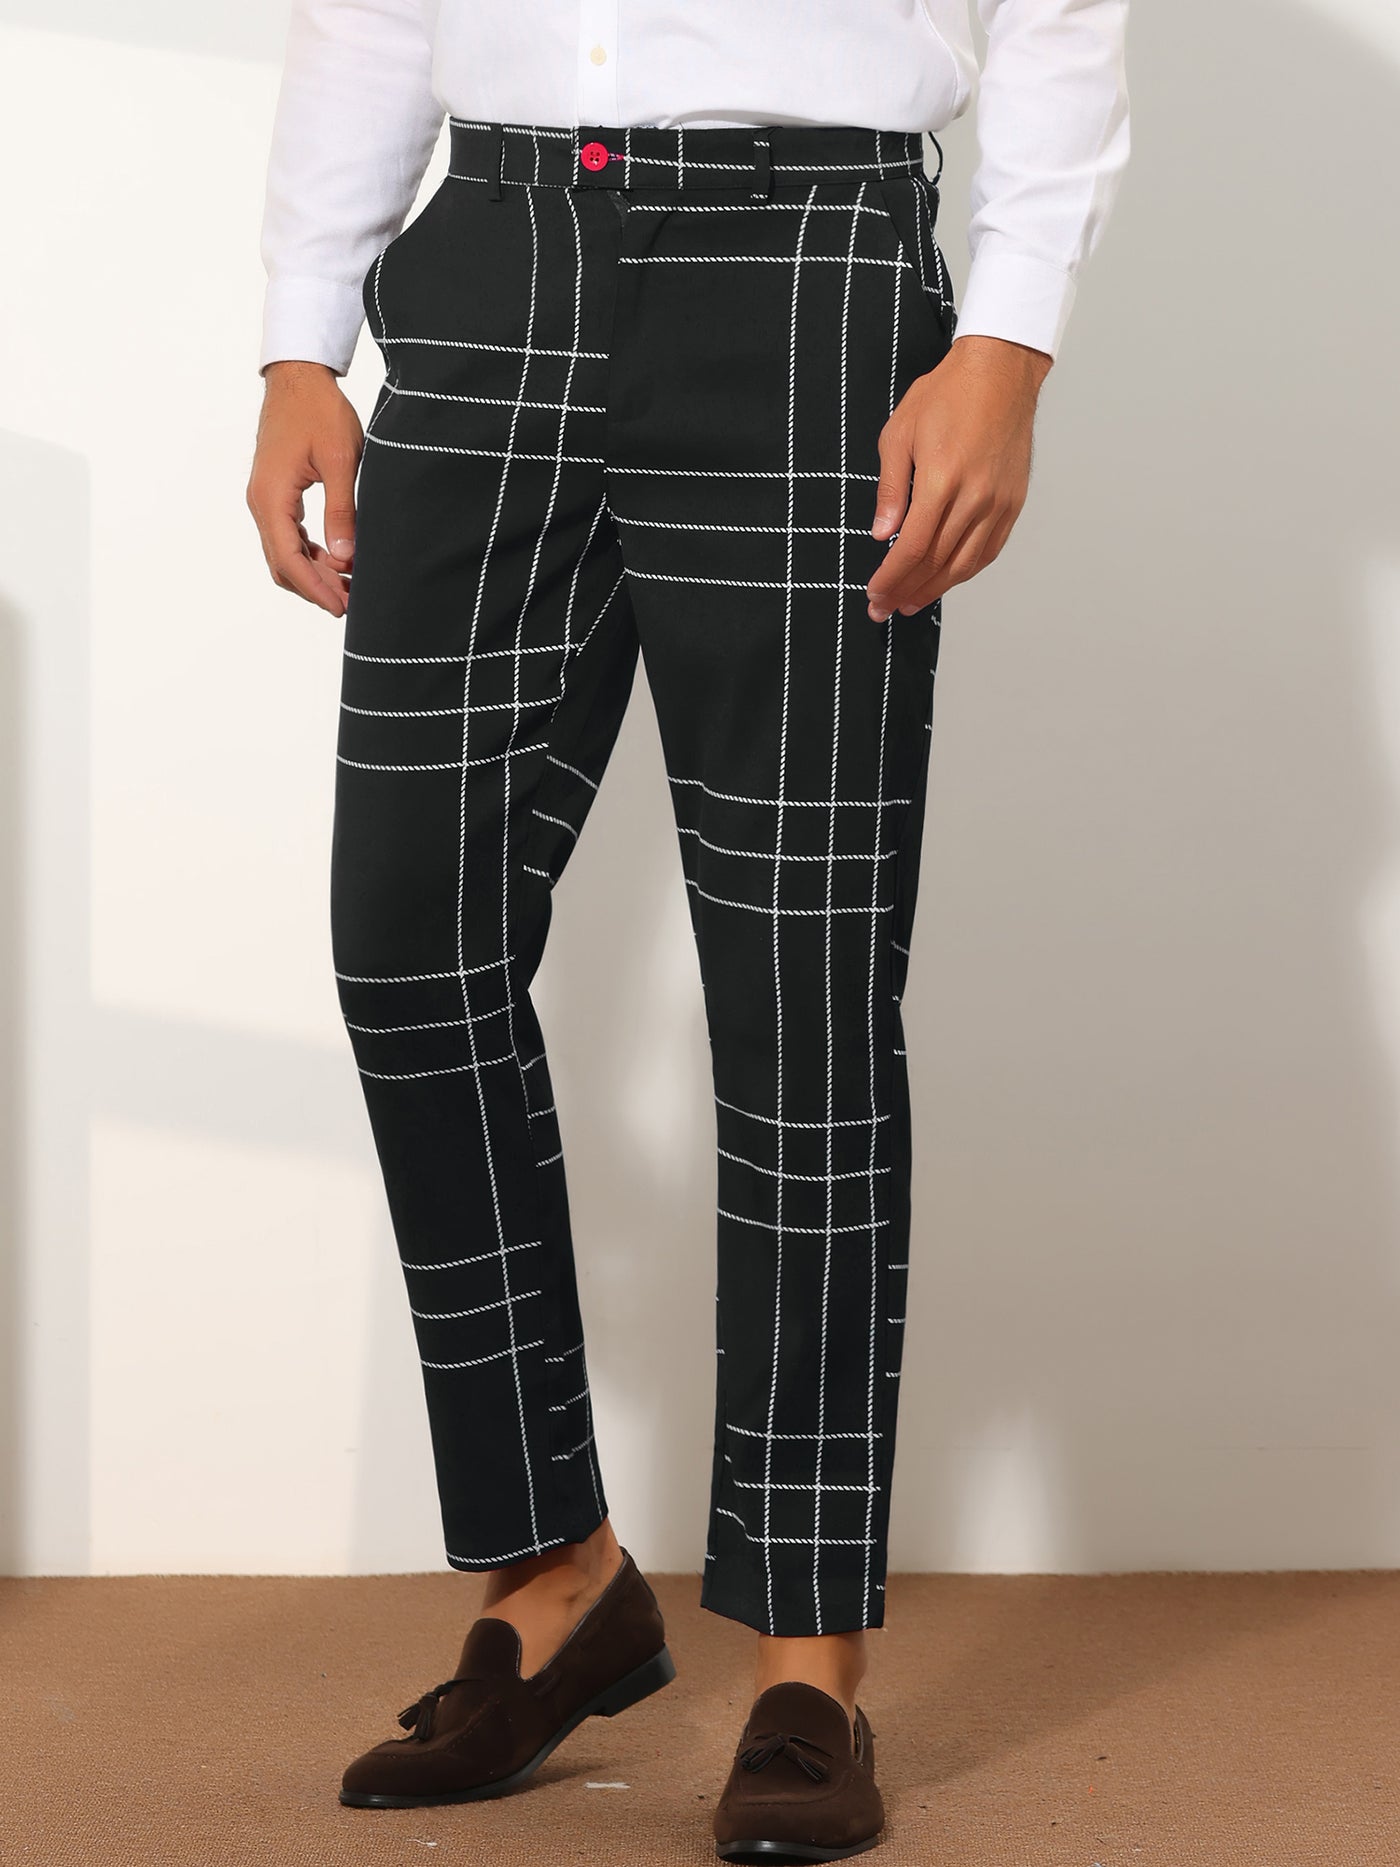 Bublédon Men's Plaid Pants Slim Fit Chino Flat Front Business Checked Trousers